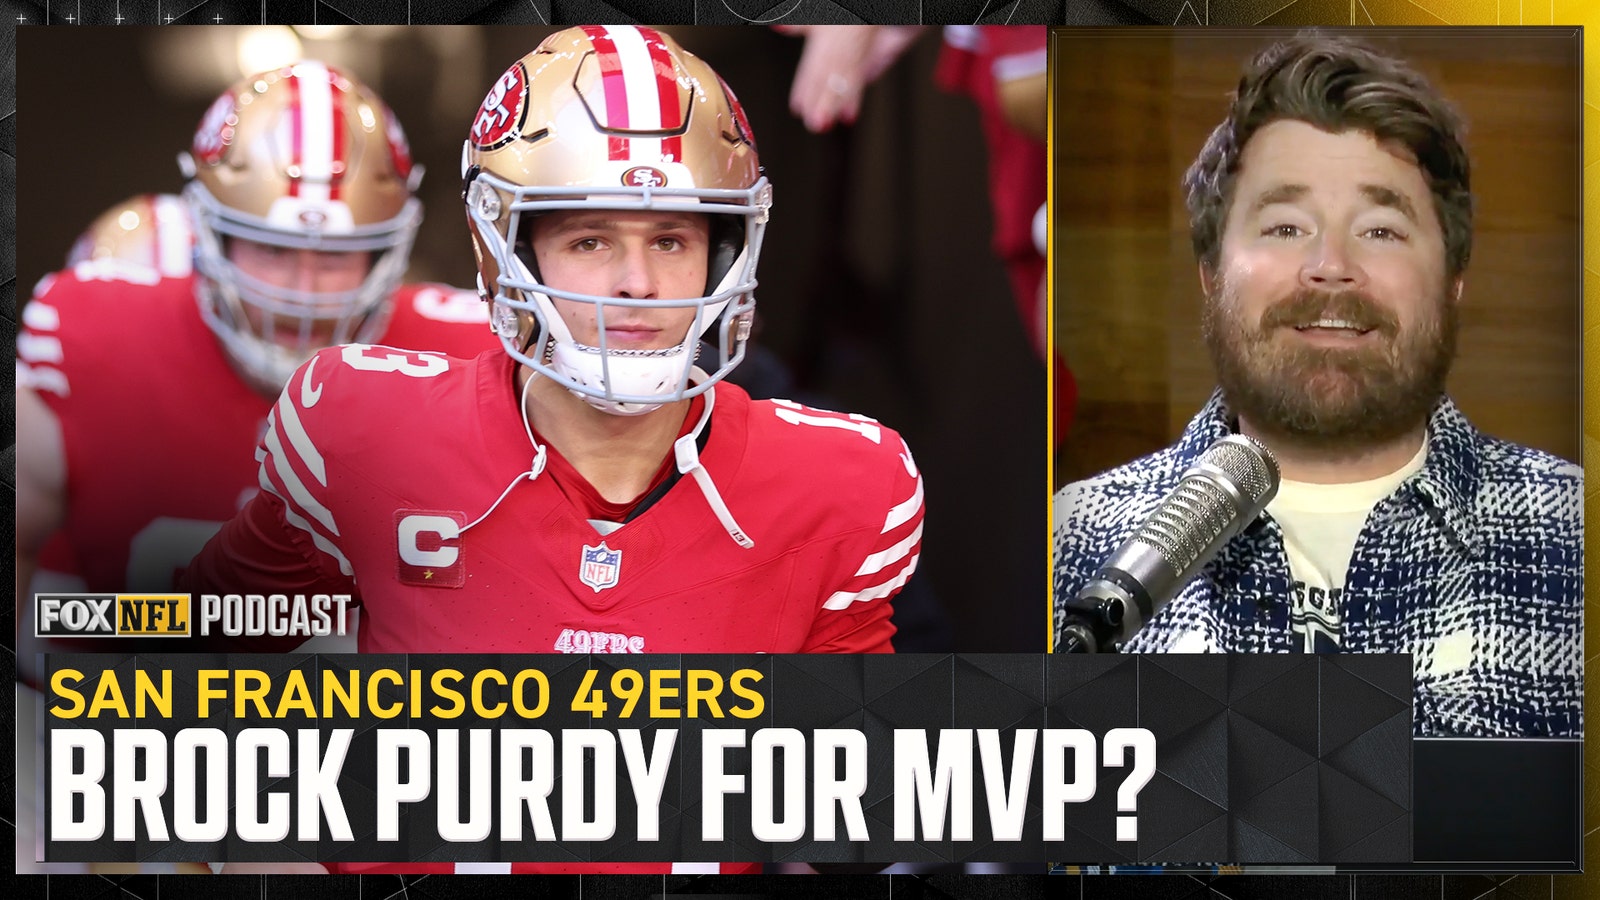 Did Brock Purdy lock up the MVP award after 49ers' victory over Cardinals? 